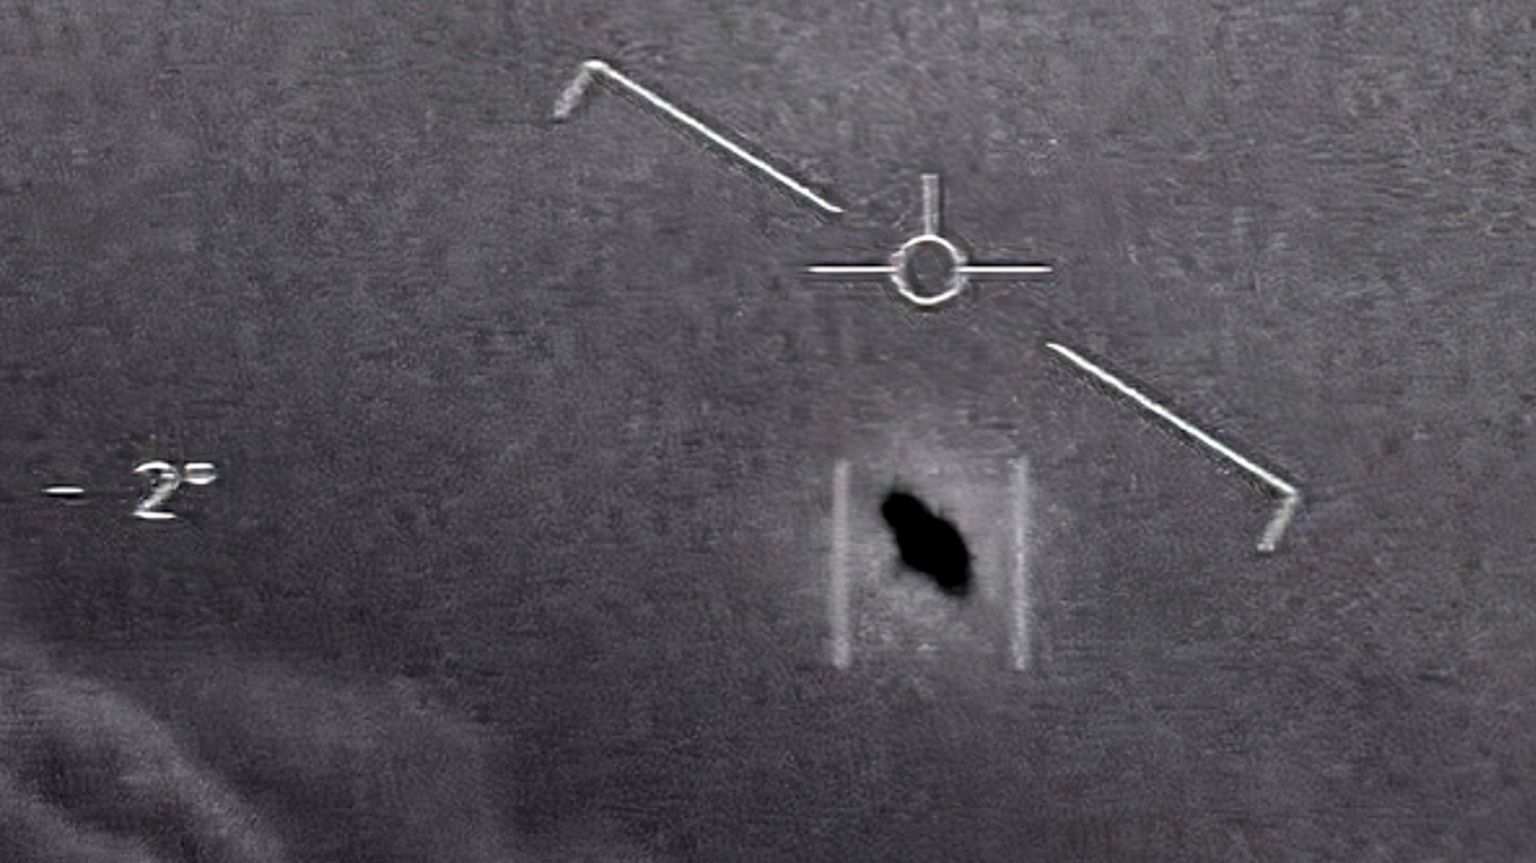 A screen grab of declassified videos of "unexplained aerial phenomena" filmed by US military pilots